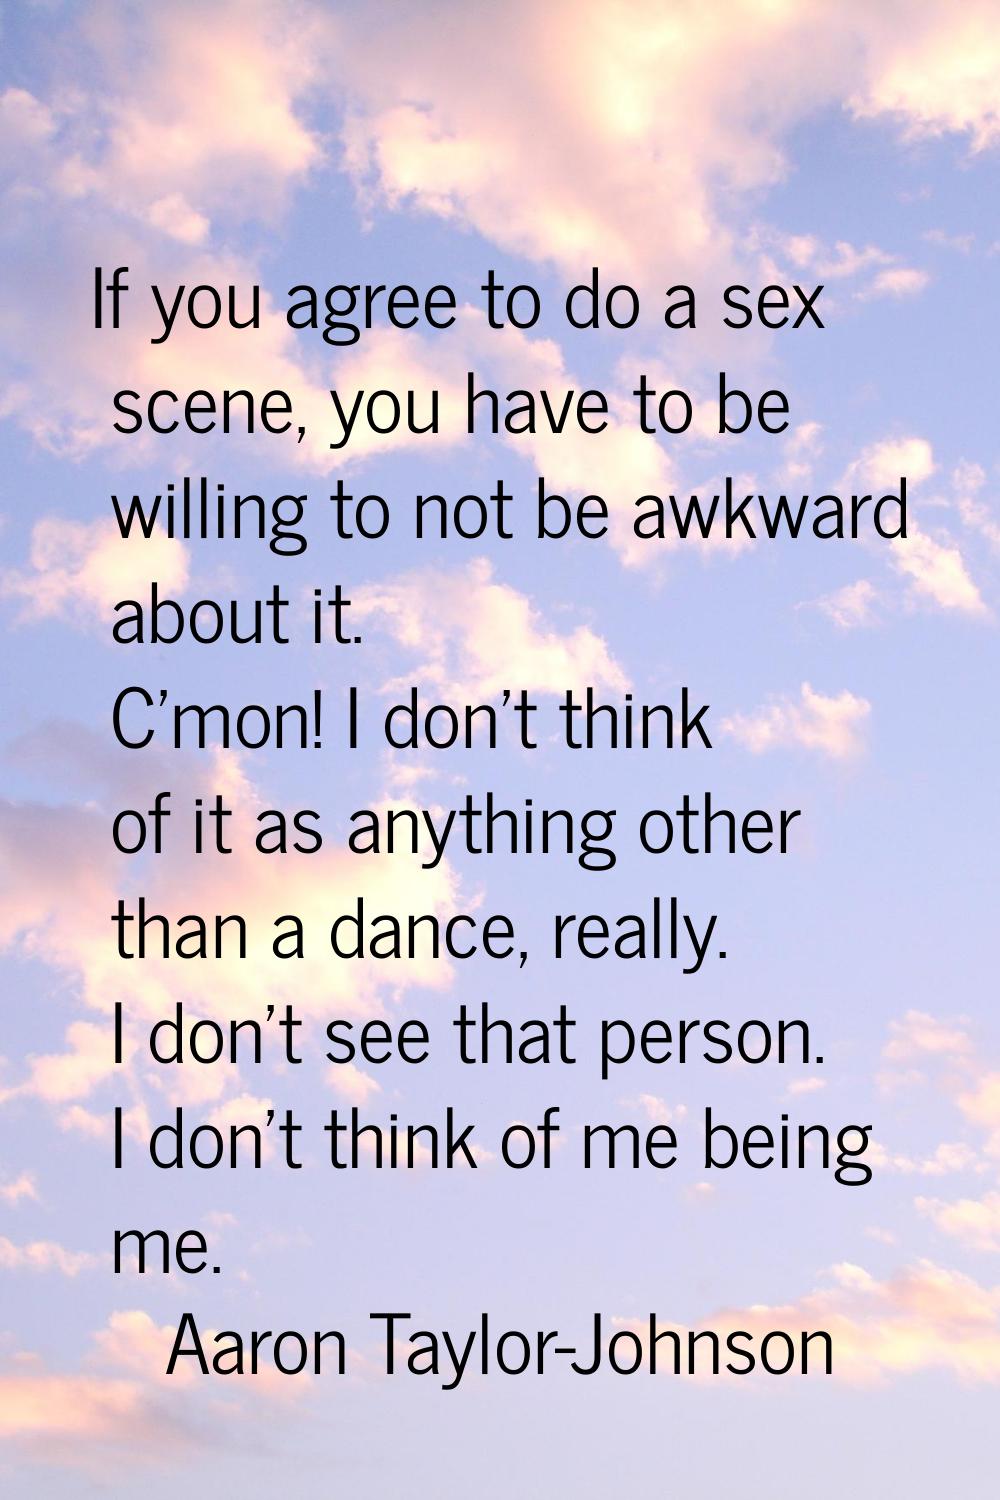 If you agree to do a sex scene, you have to be willing to not be awkward about it. C'mon! I don't t